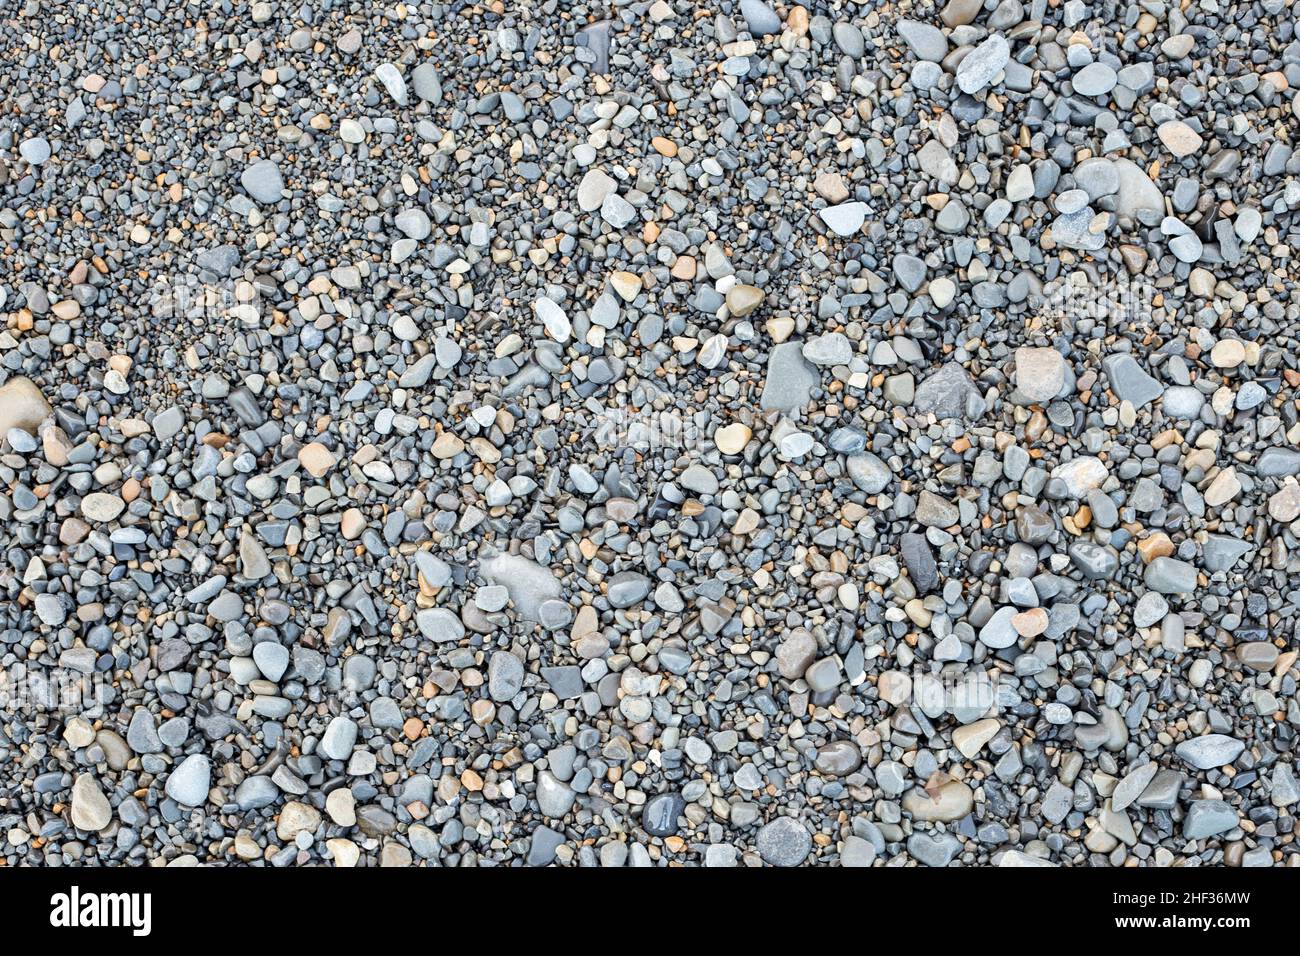 A background of small wet pebbles in different shades of grey and ochre. stones symbolising strength and endurance. Stock Photo